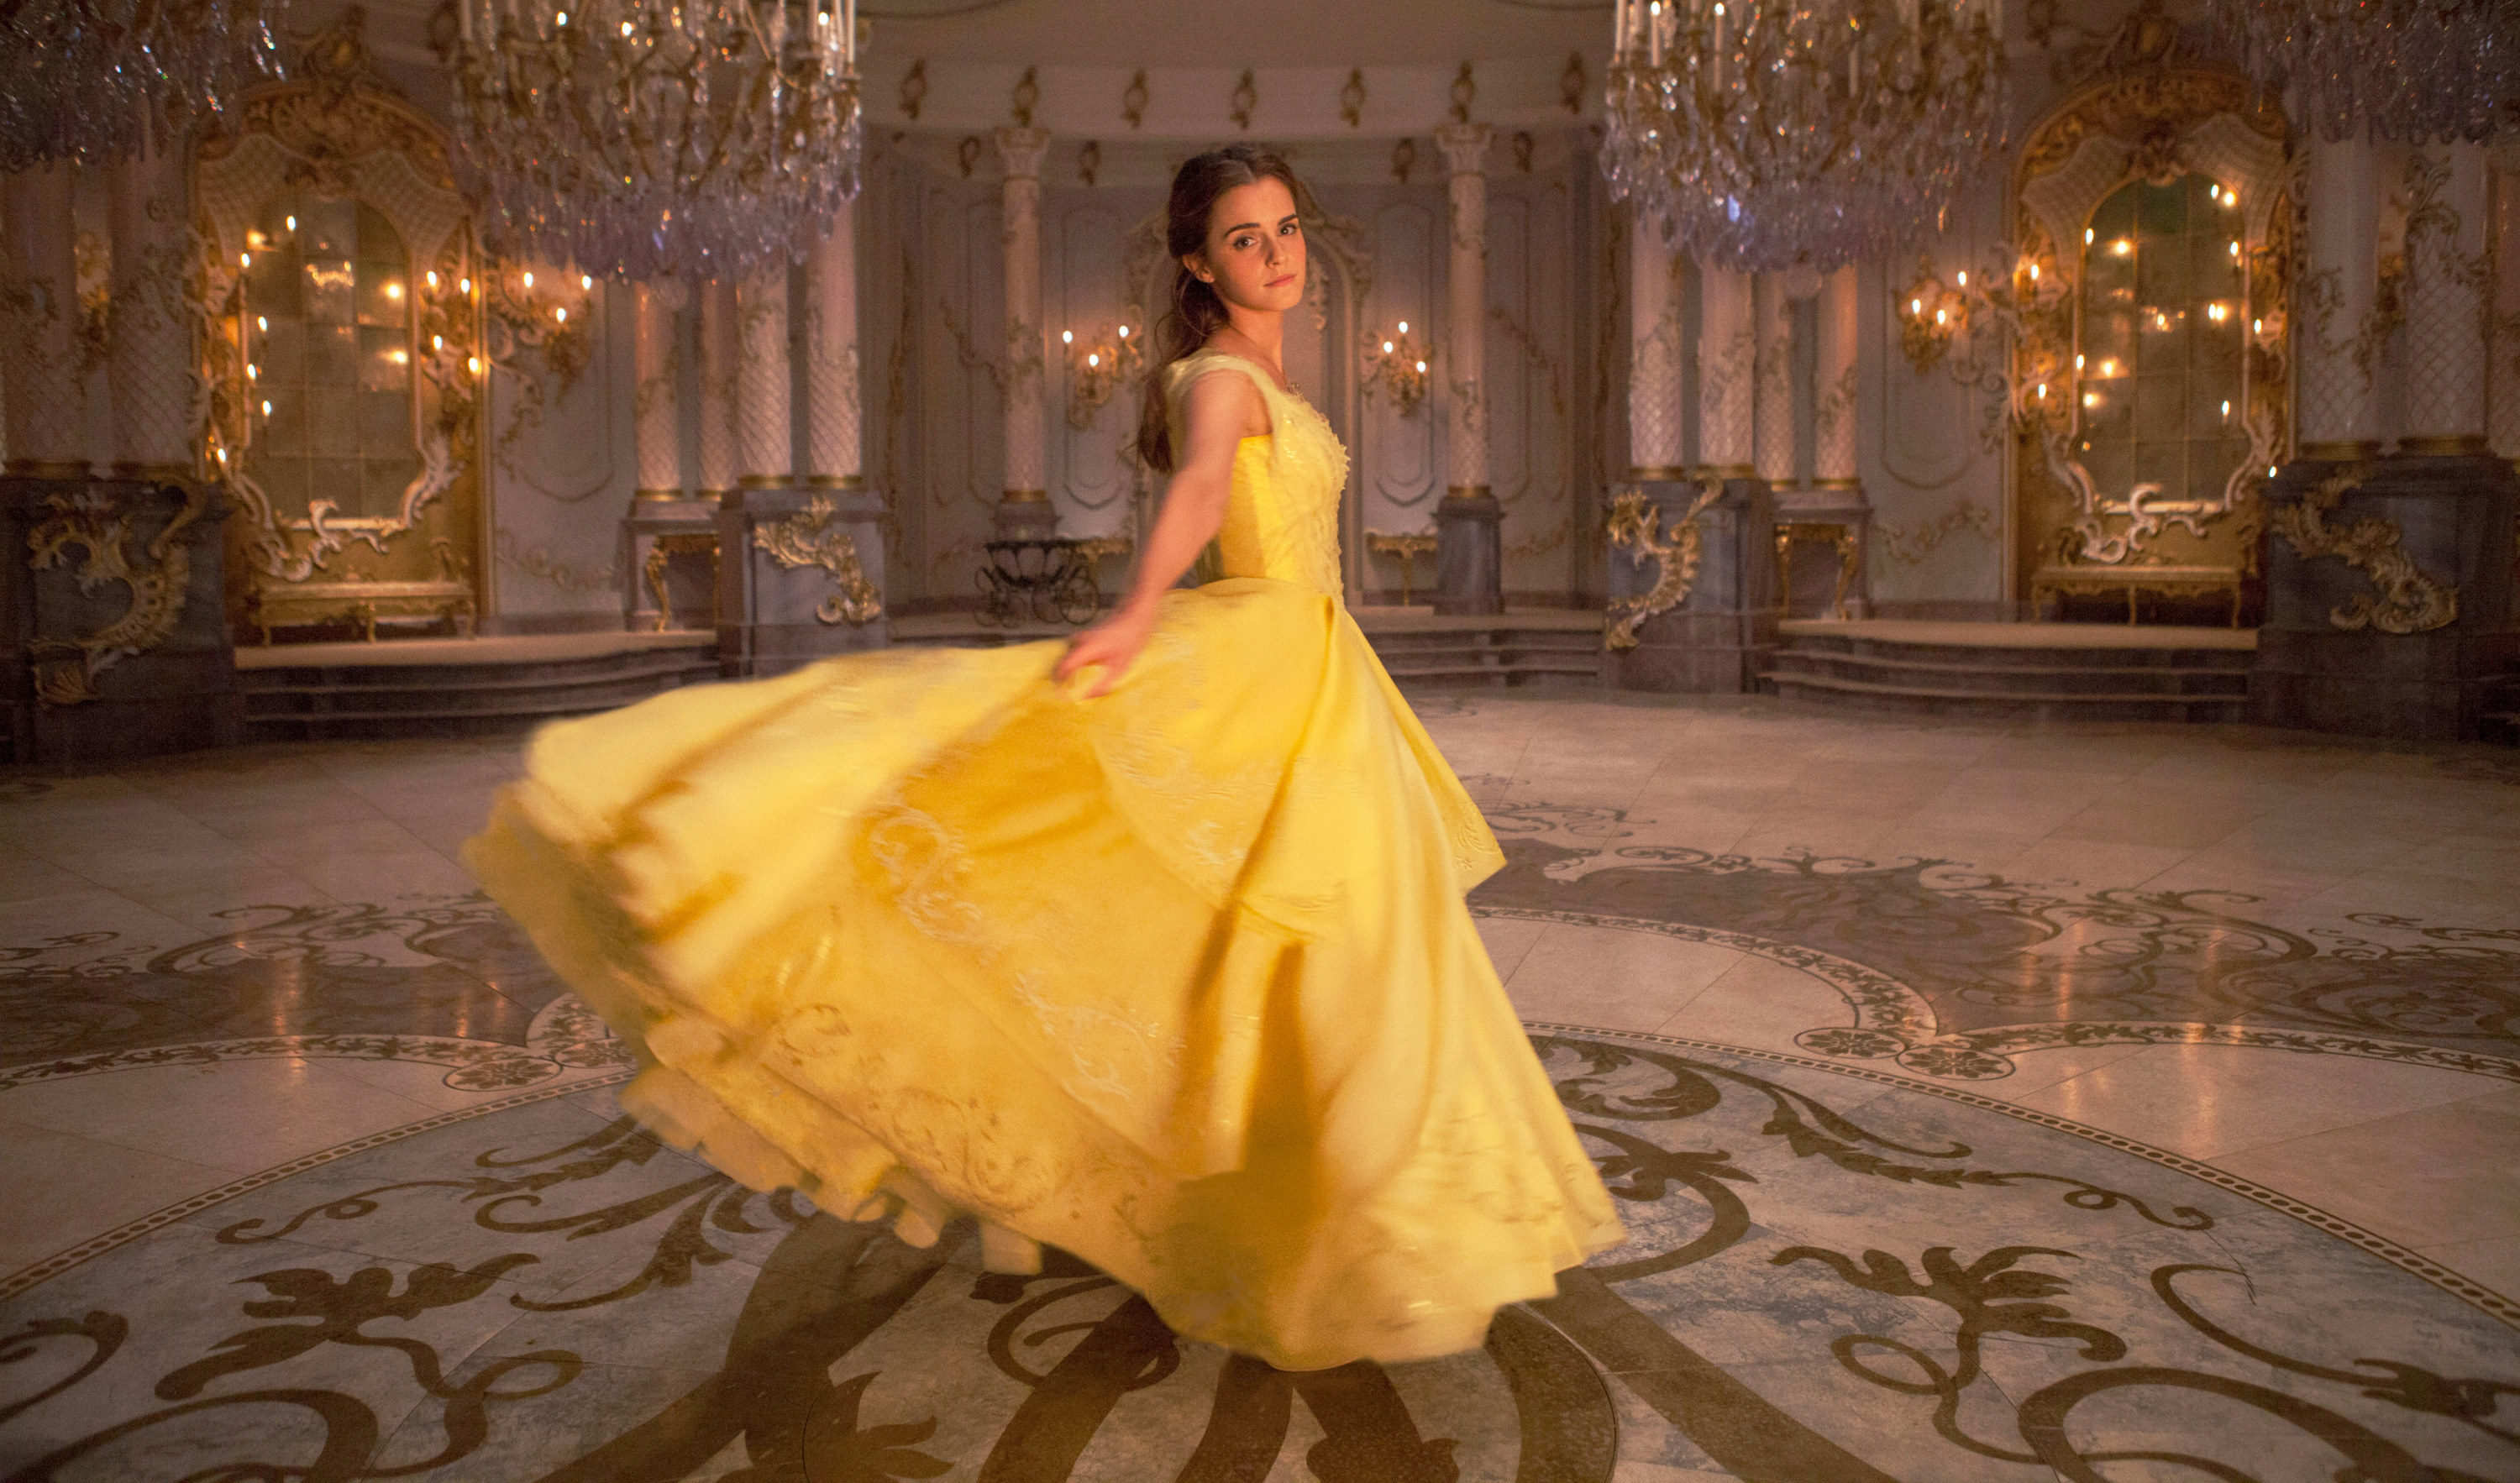 Belle wore a corset-free version of her inconic ballgown